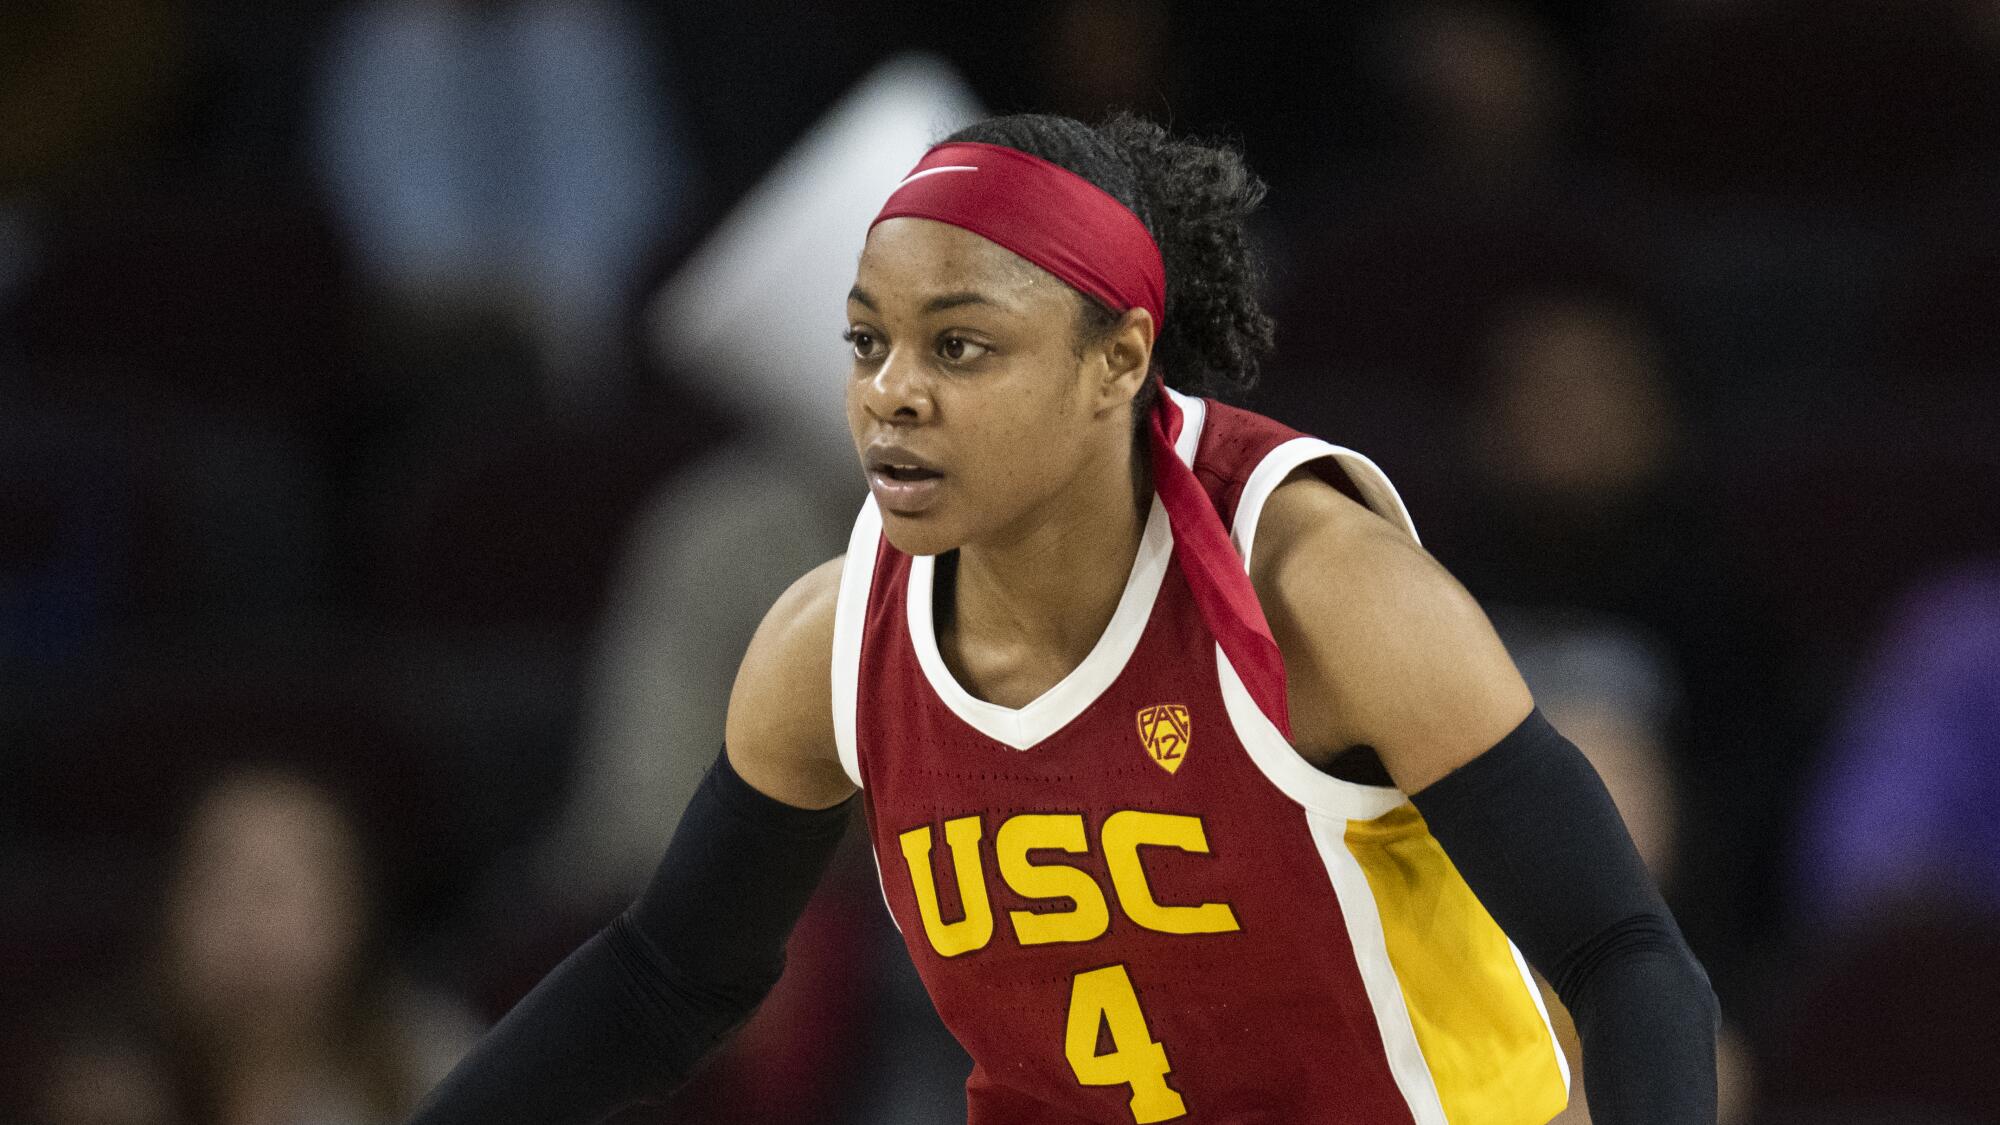 USC guard Kayla Williams takes her stance during a game against UCLA in 2022.